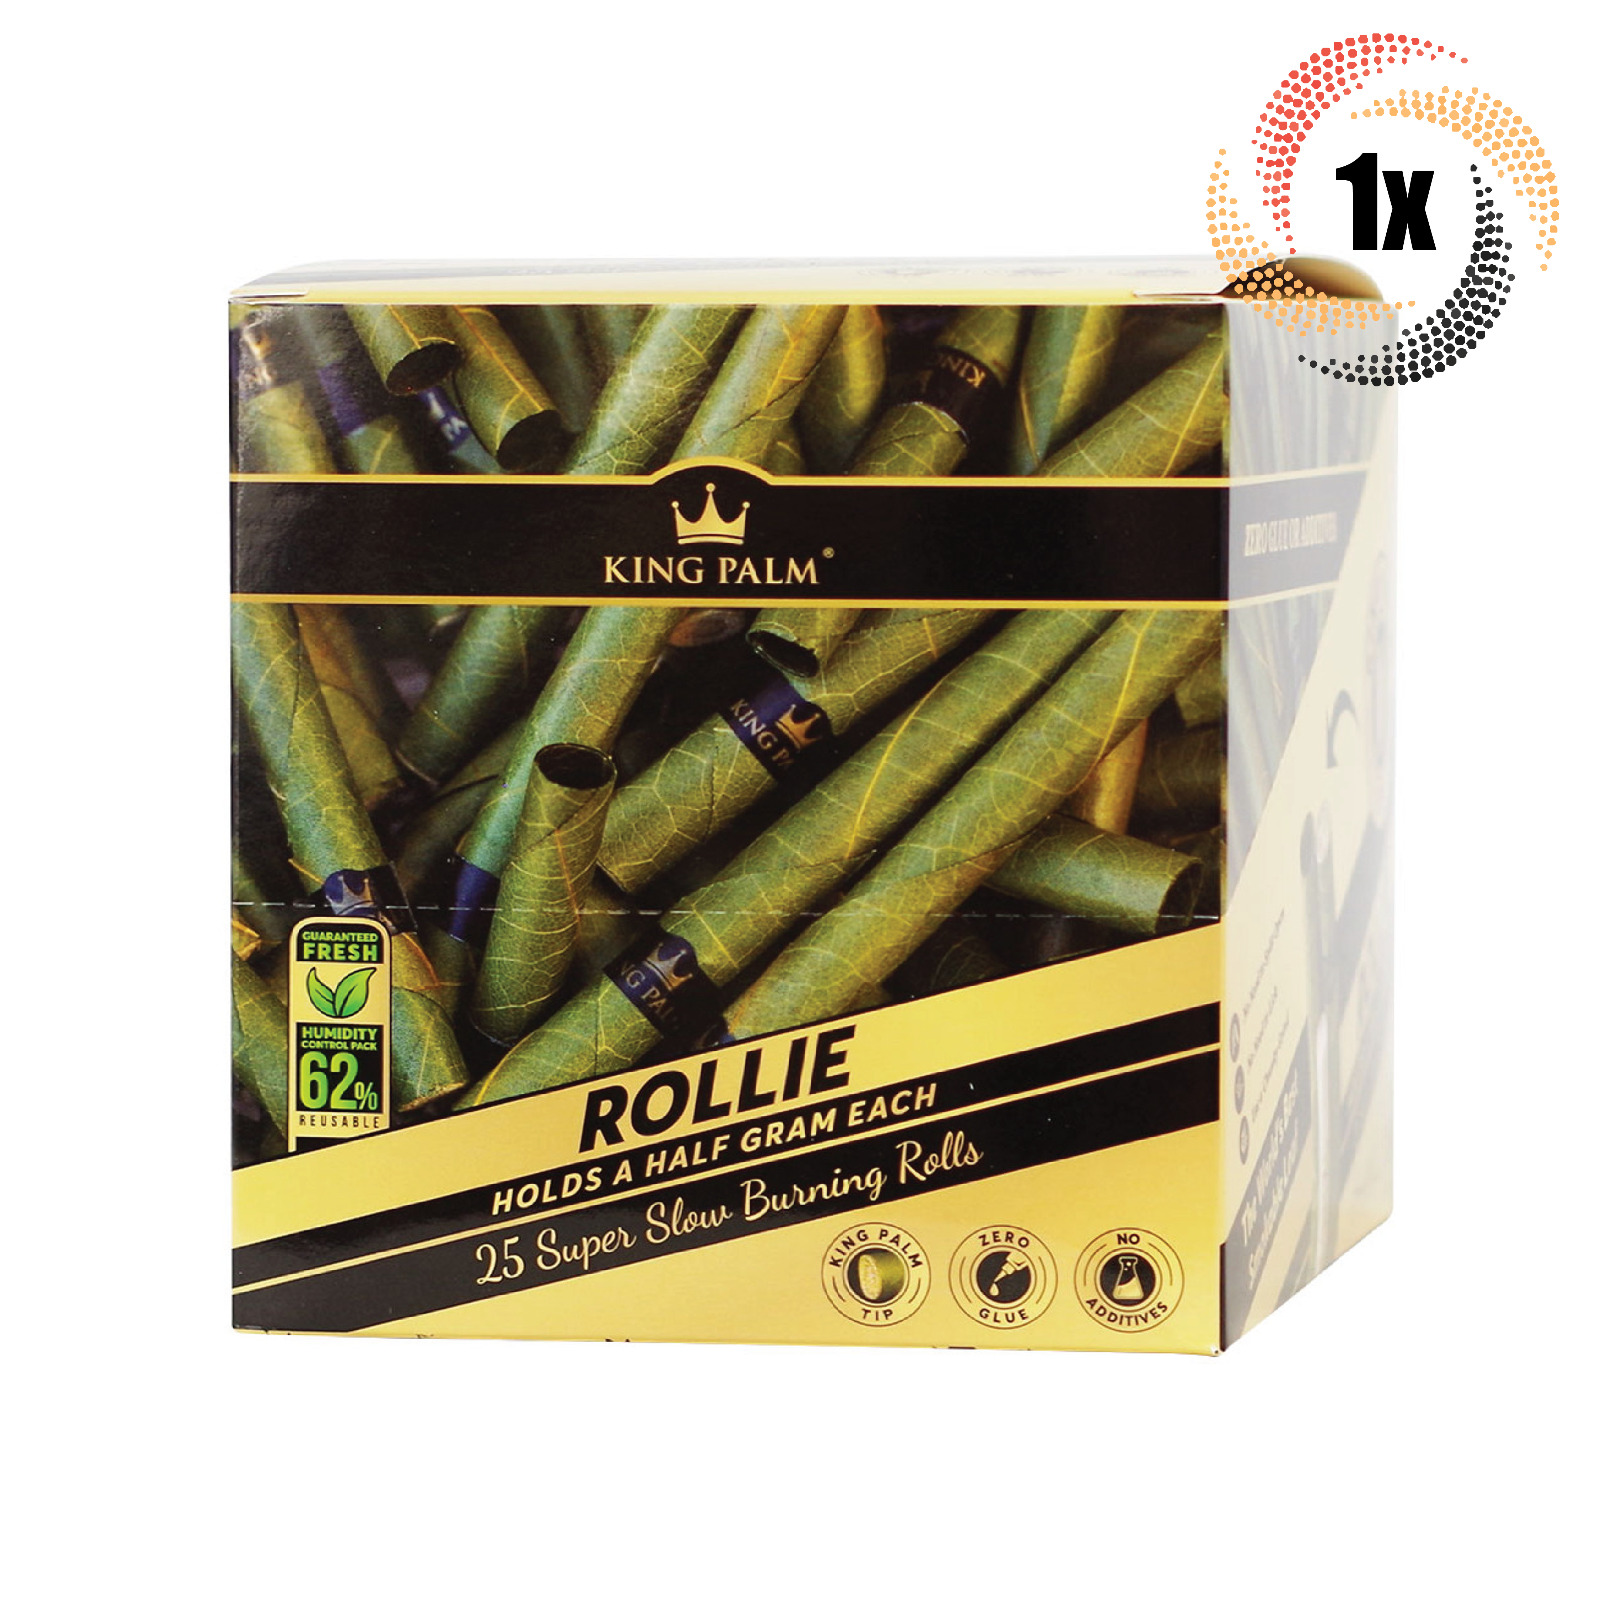 1x Box King Palm Rollies | 8 Packs With 25 Rollies Each | + 2 Free Tubes